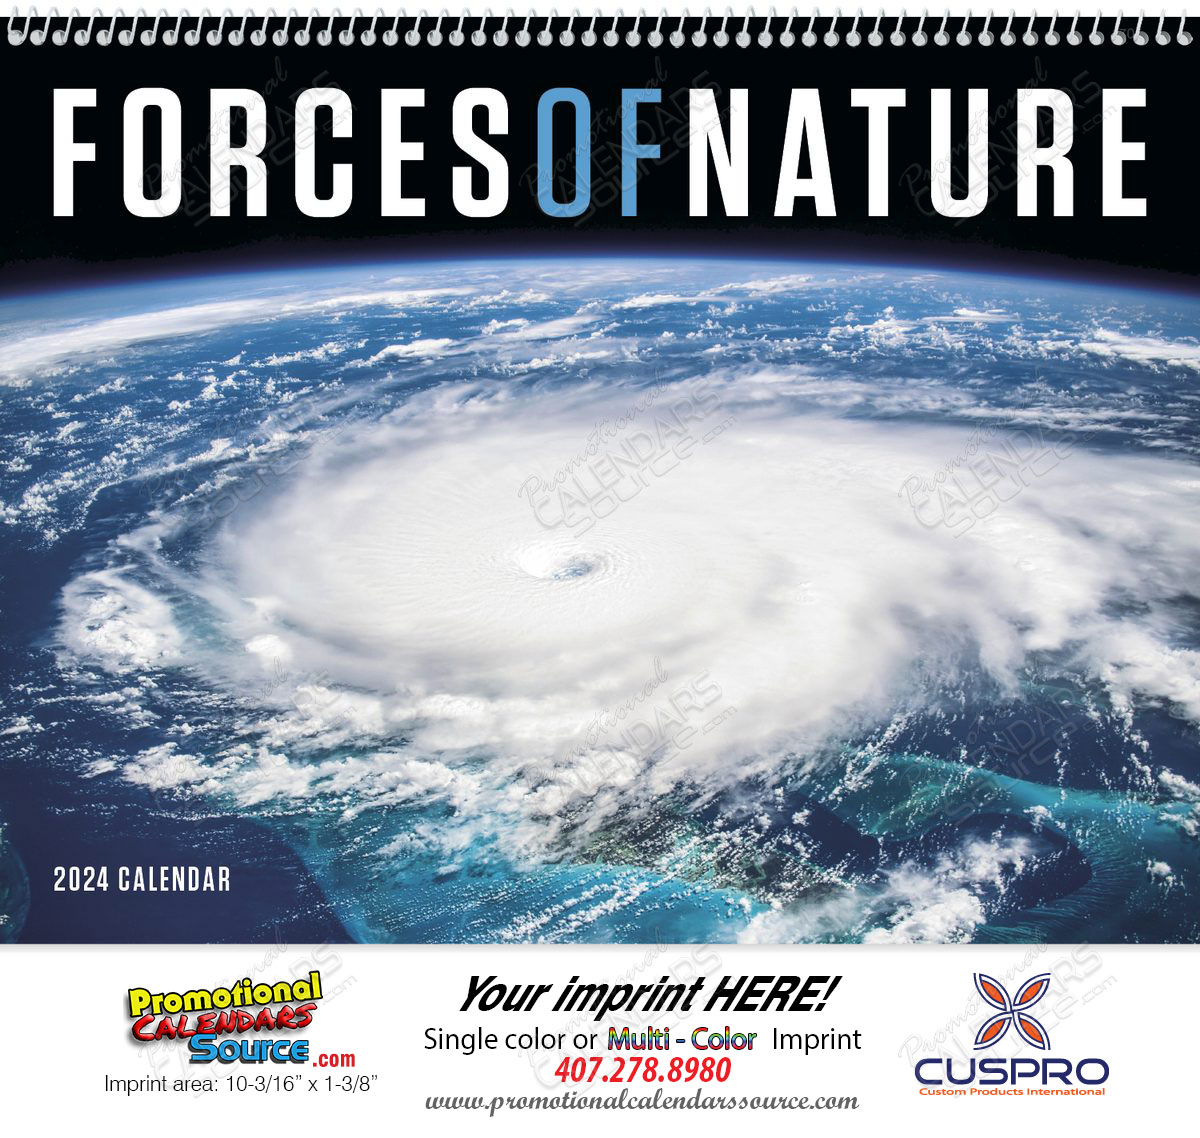 Forces of Nature Promotional Calendar 